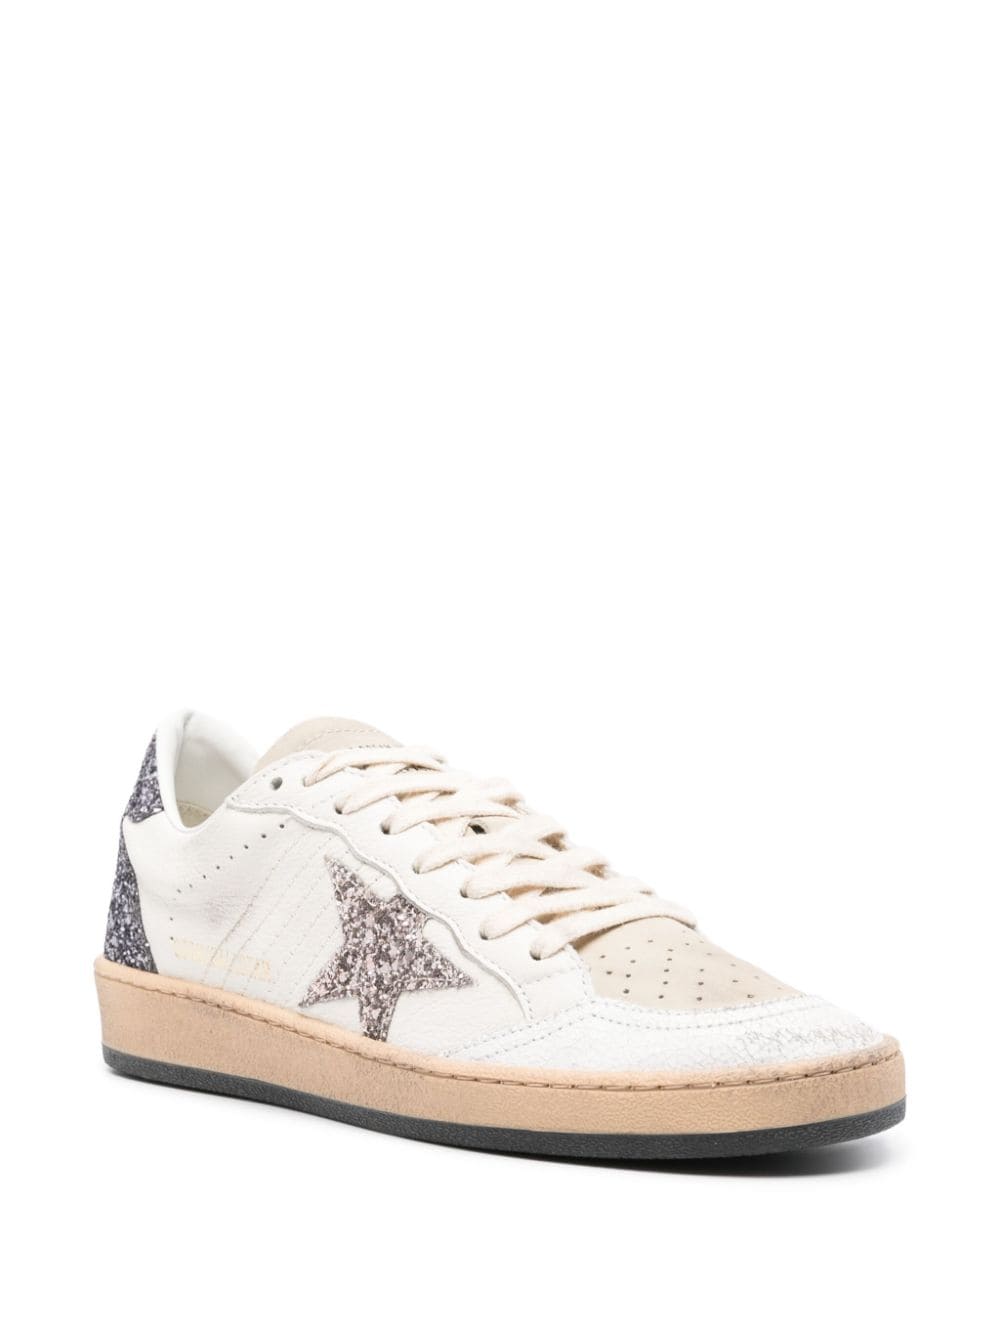 Shop Golden Goose Ball Star Glittered Leather Sneakers In White